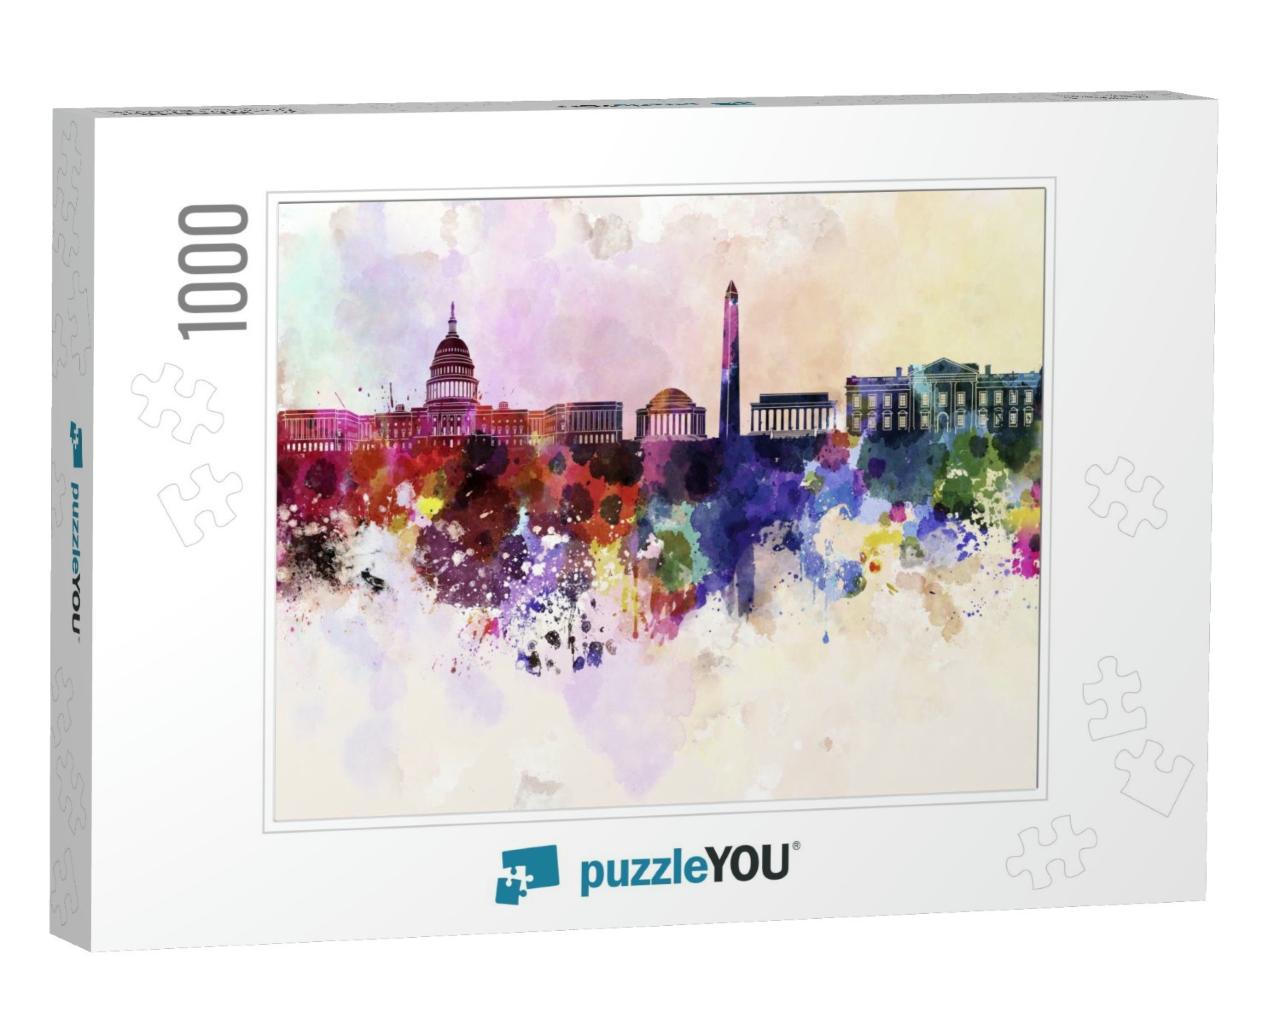 Washington Dc Skyline in Watercolor Background... Jigsaw Puzzle with 1000 pieces